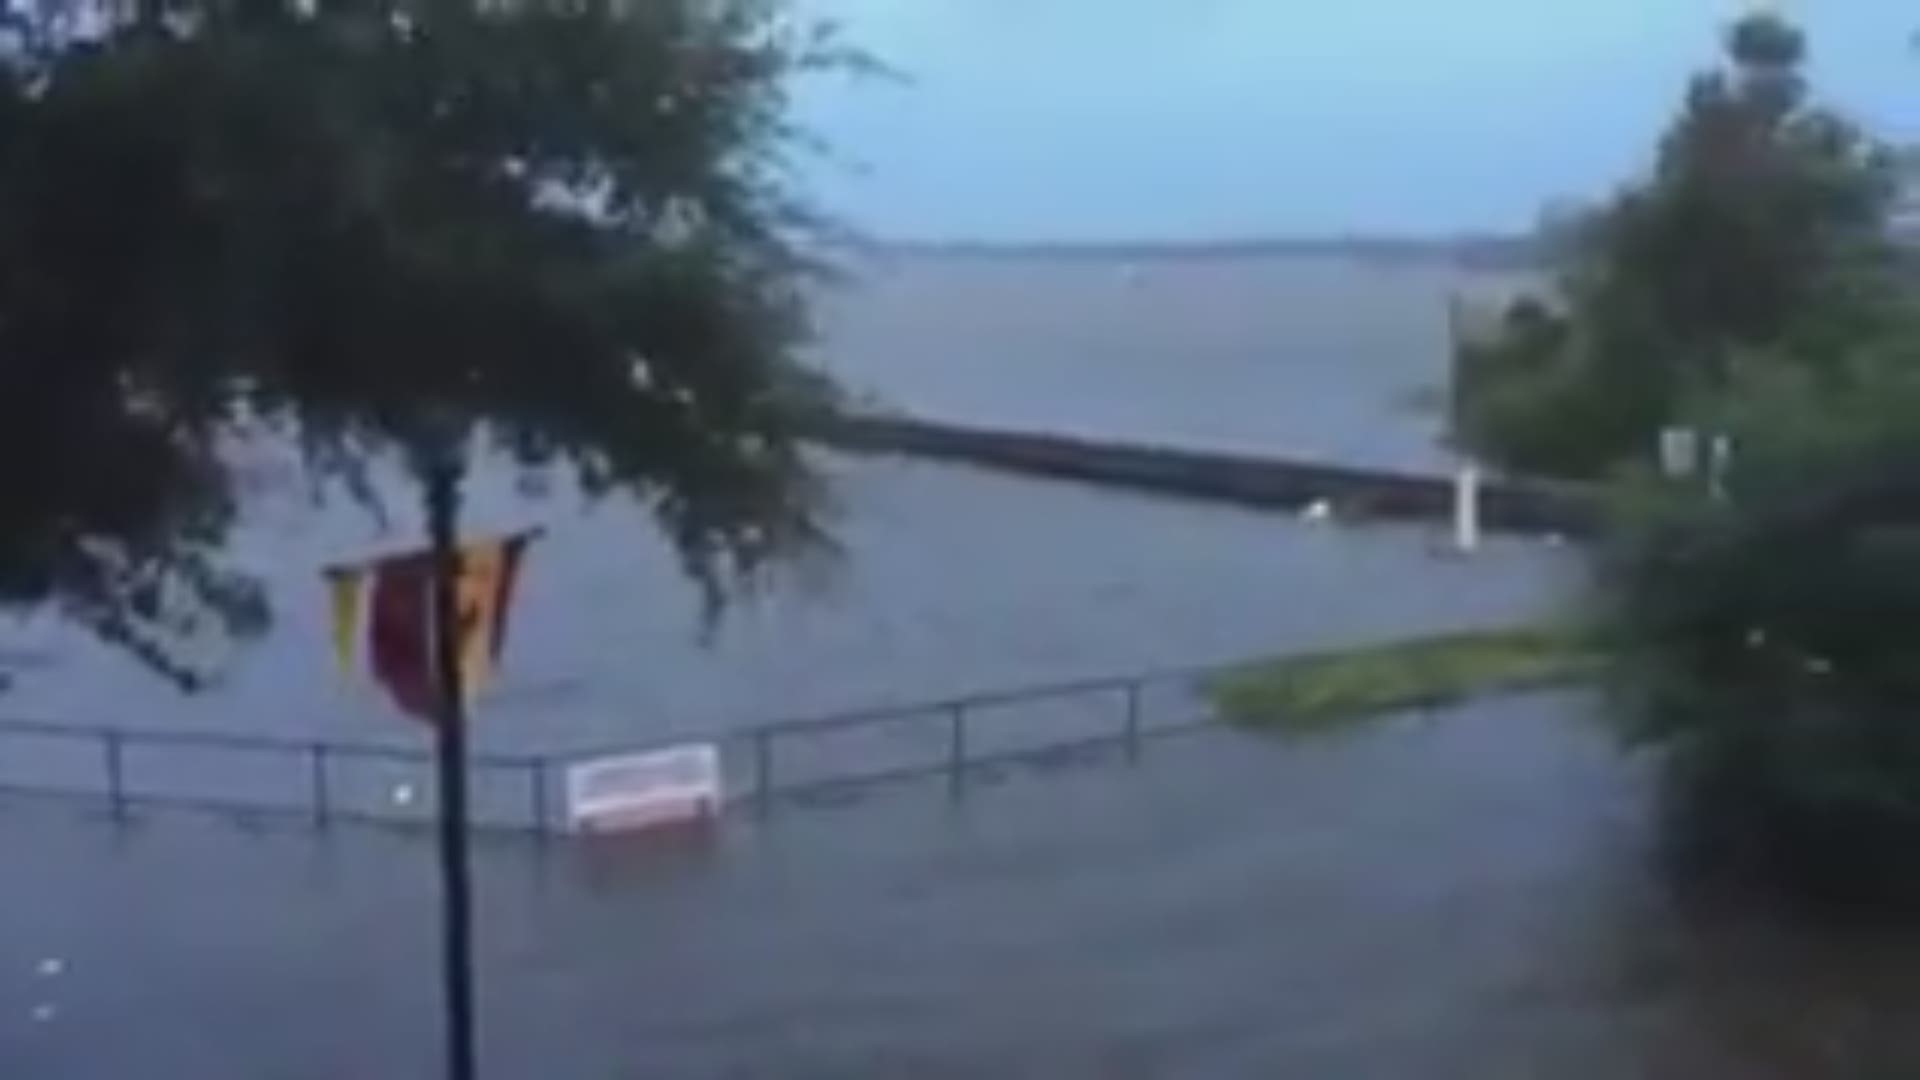 Hurricane Florence causes severe flooding in New Bern, NC